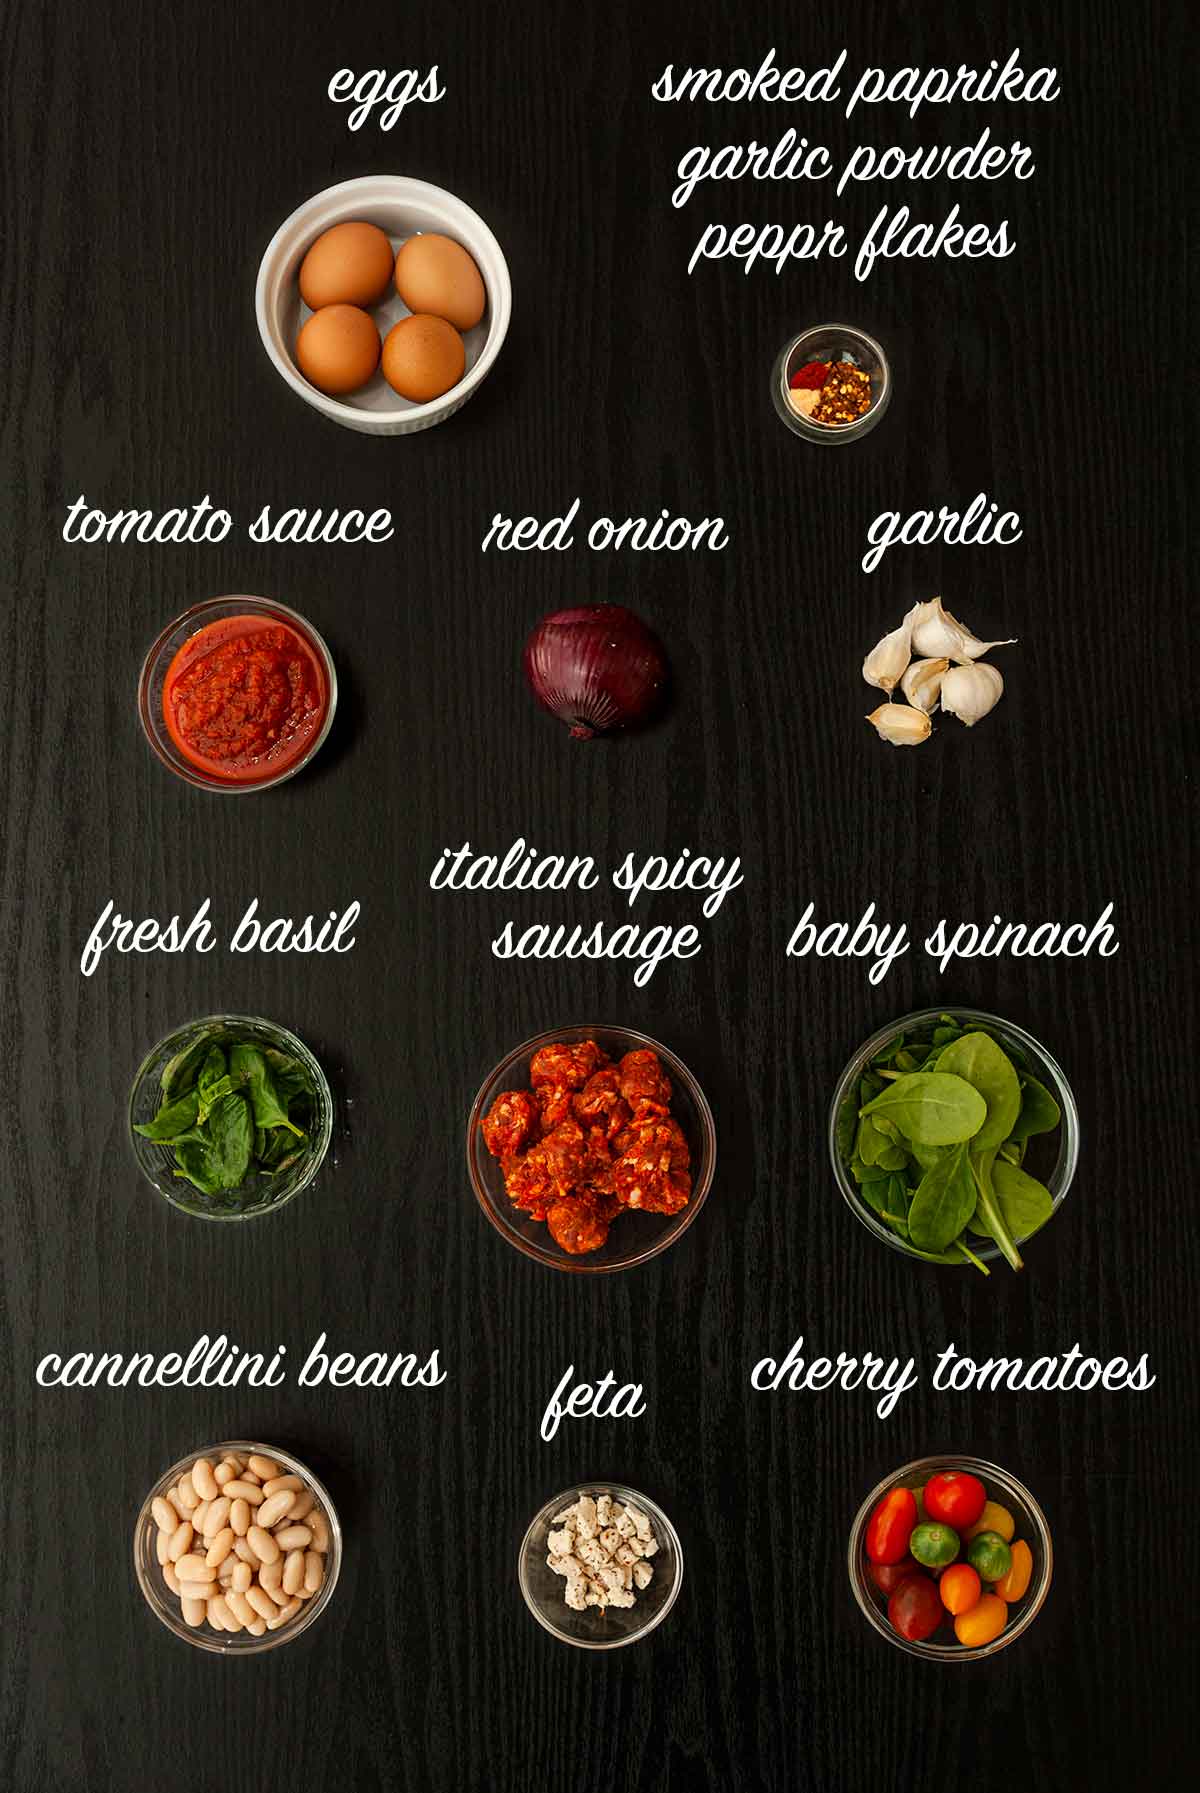 11 ingredients that make Italian Eggs in Purgatory with titles describing what they are.